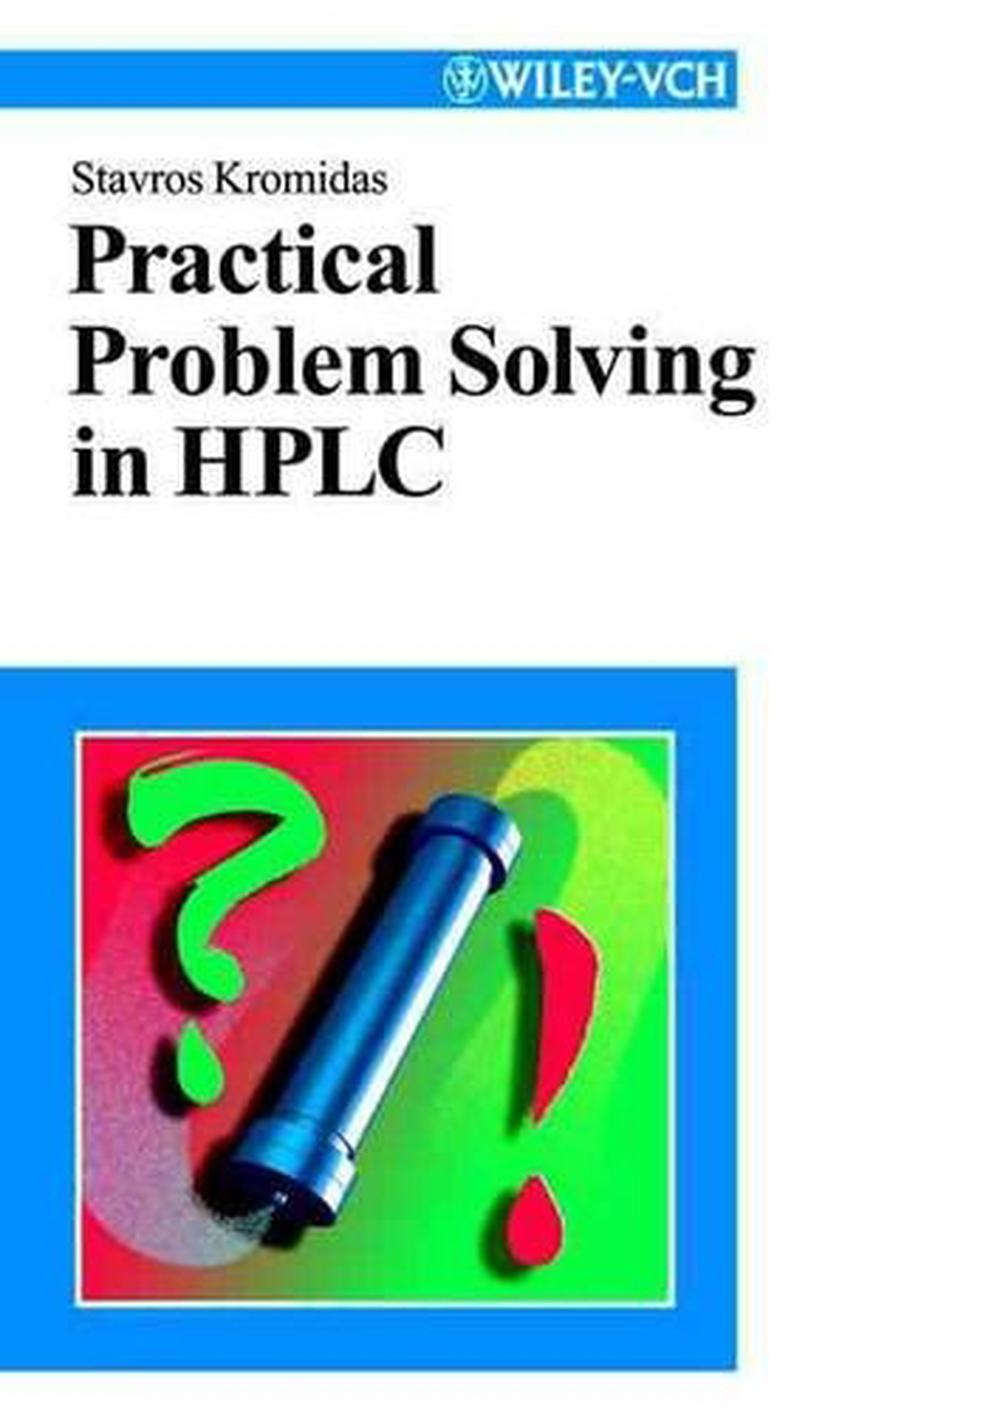 more practical problem solving in hplc